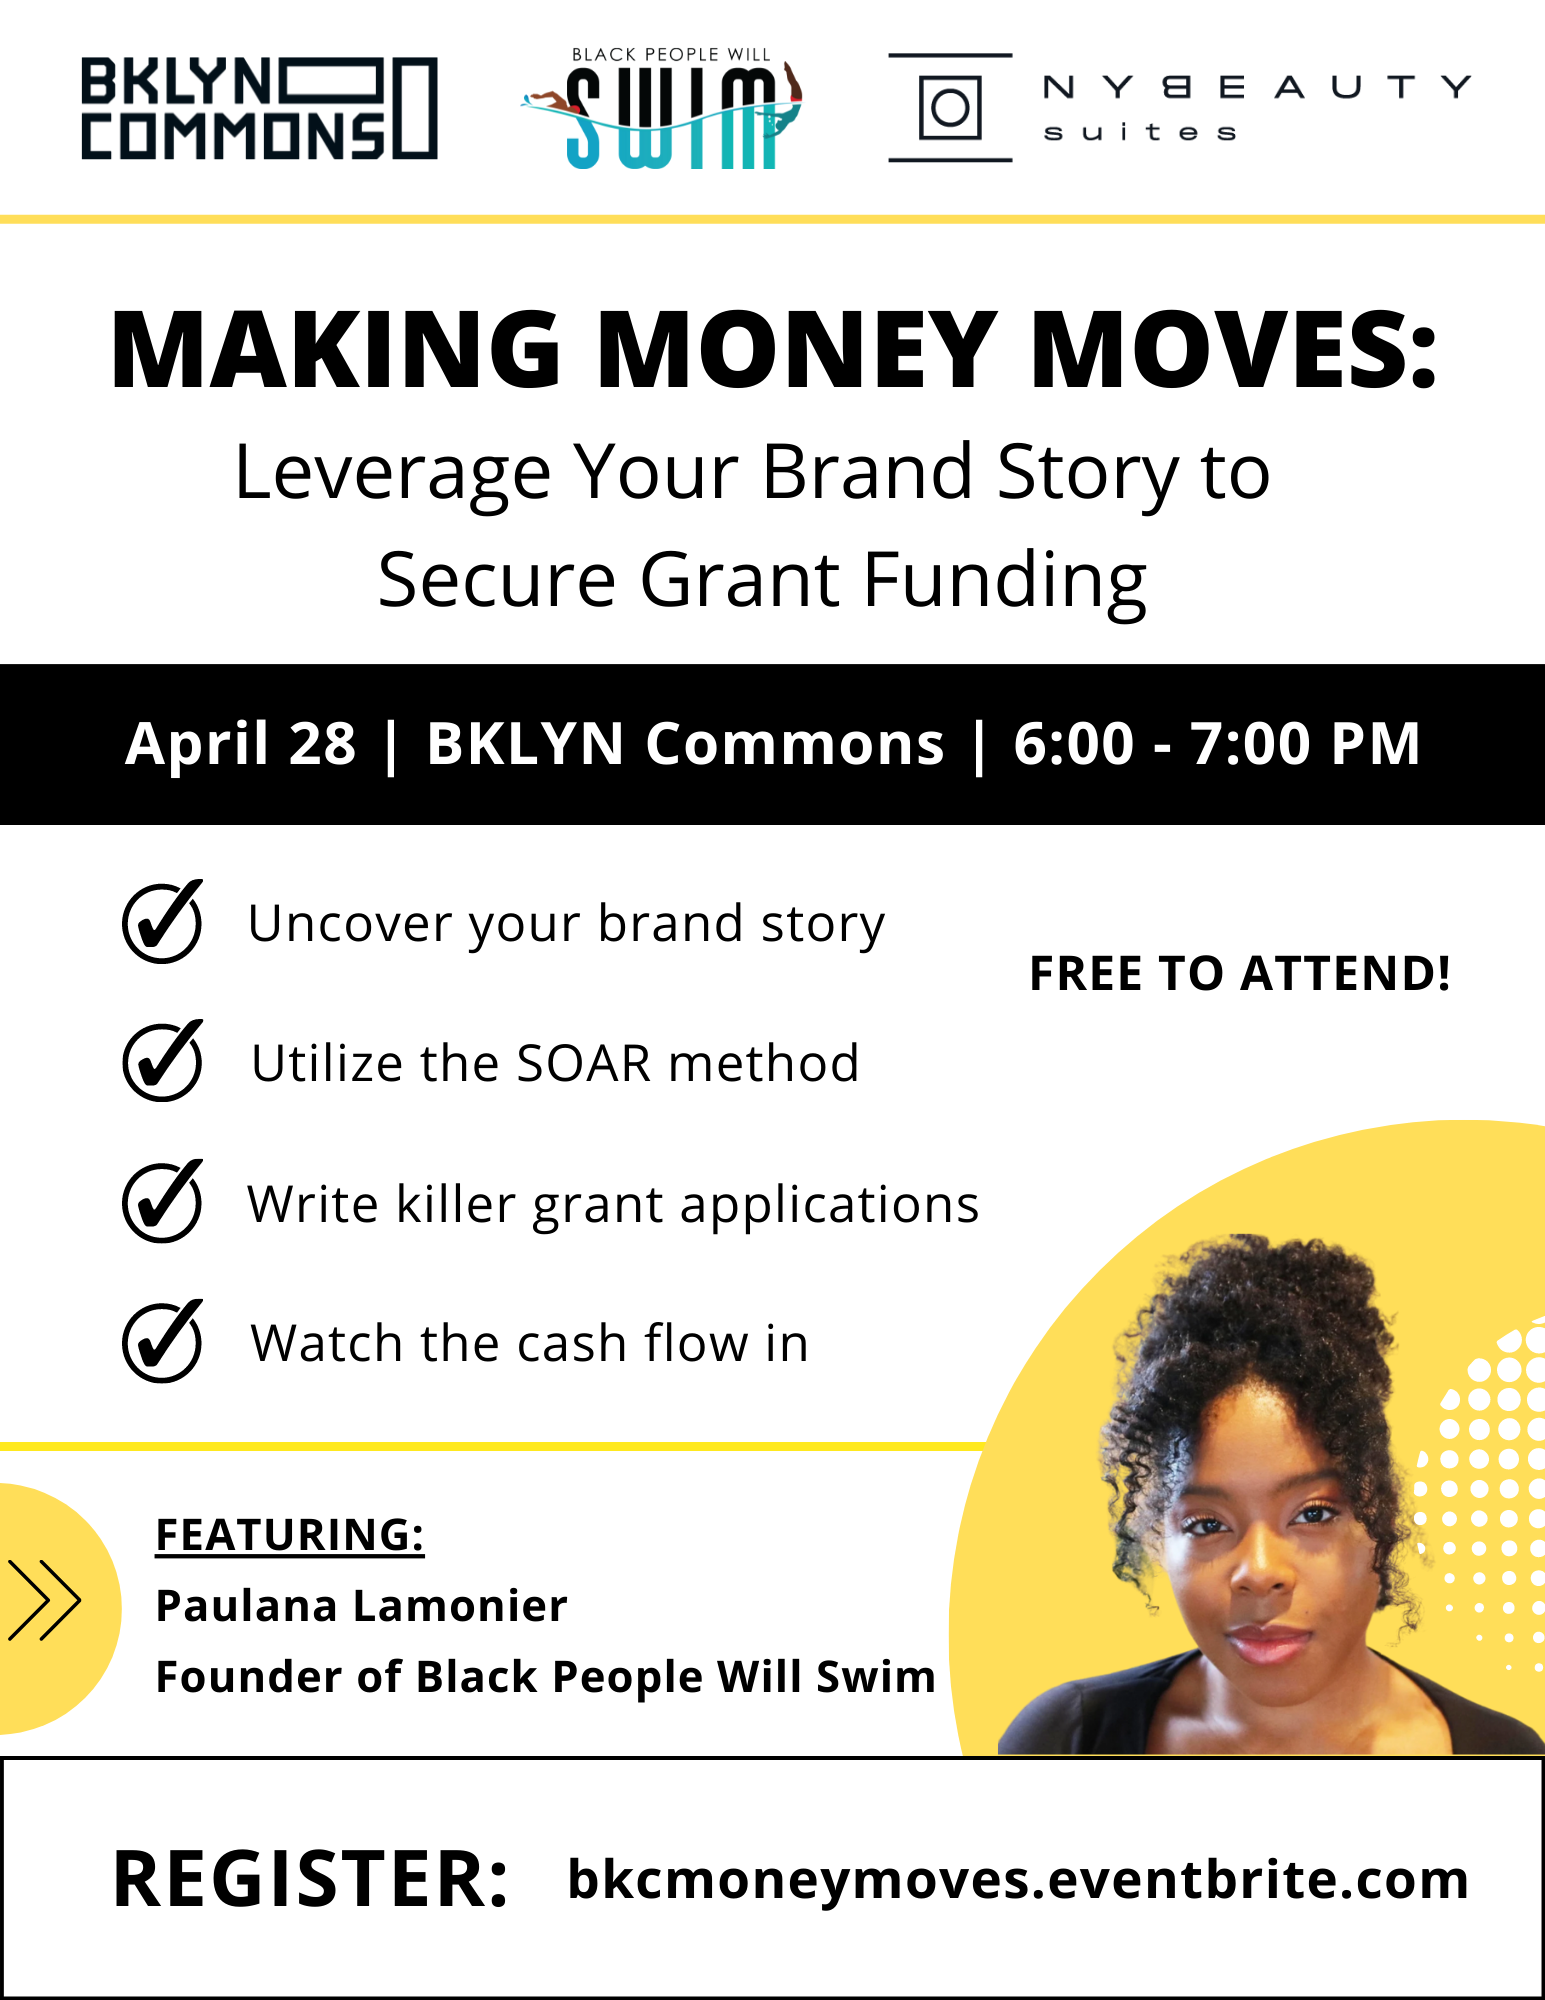 Making-Money-Moves-How-to-Leverage-Your-Brand-Story-to-Grant-Funding-bklyn-commons